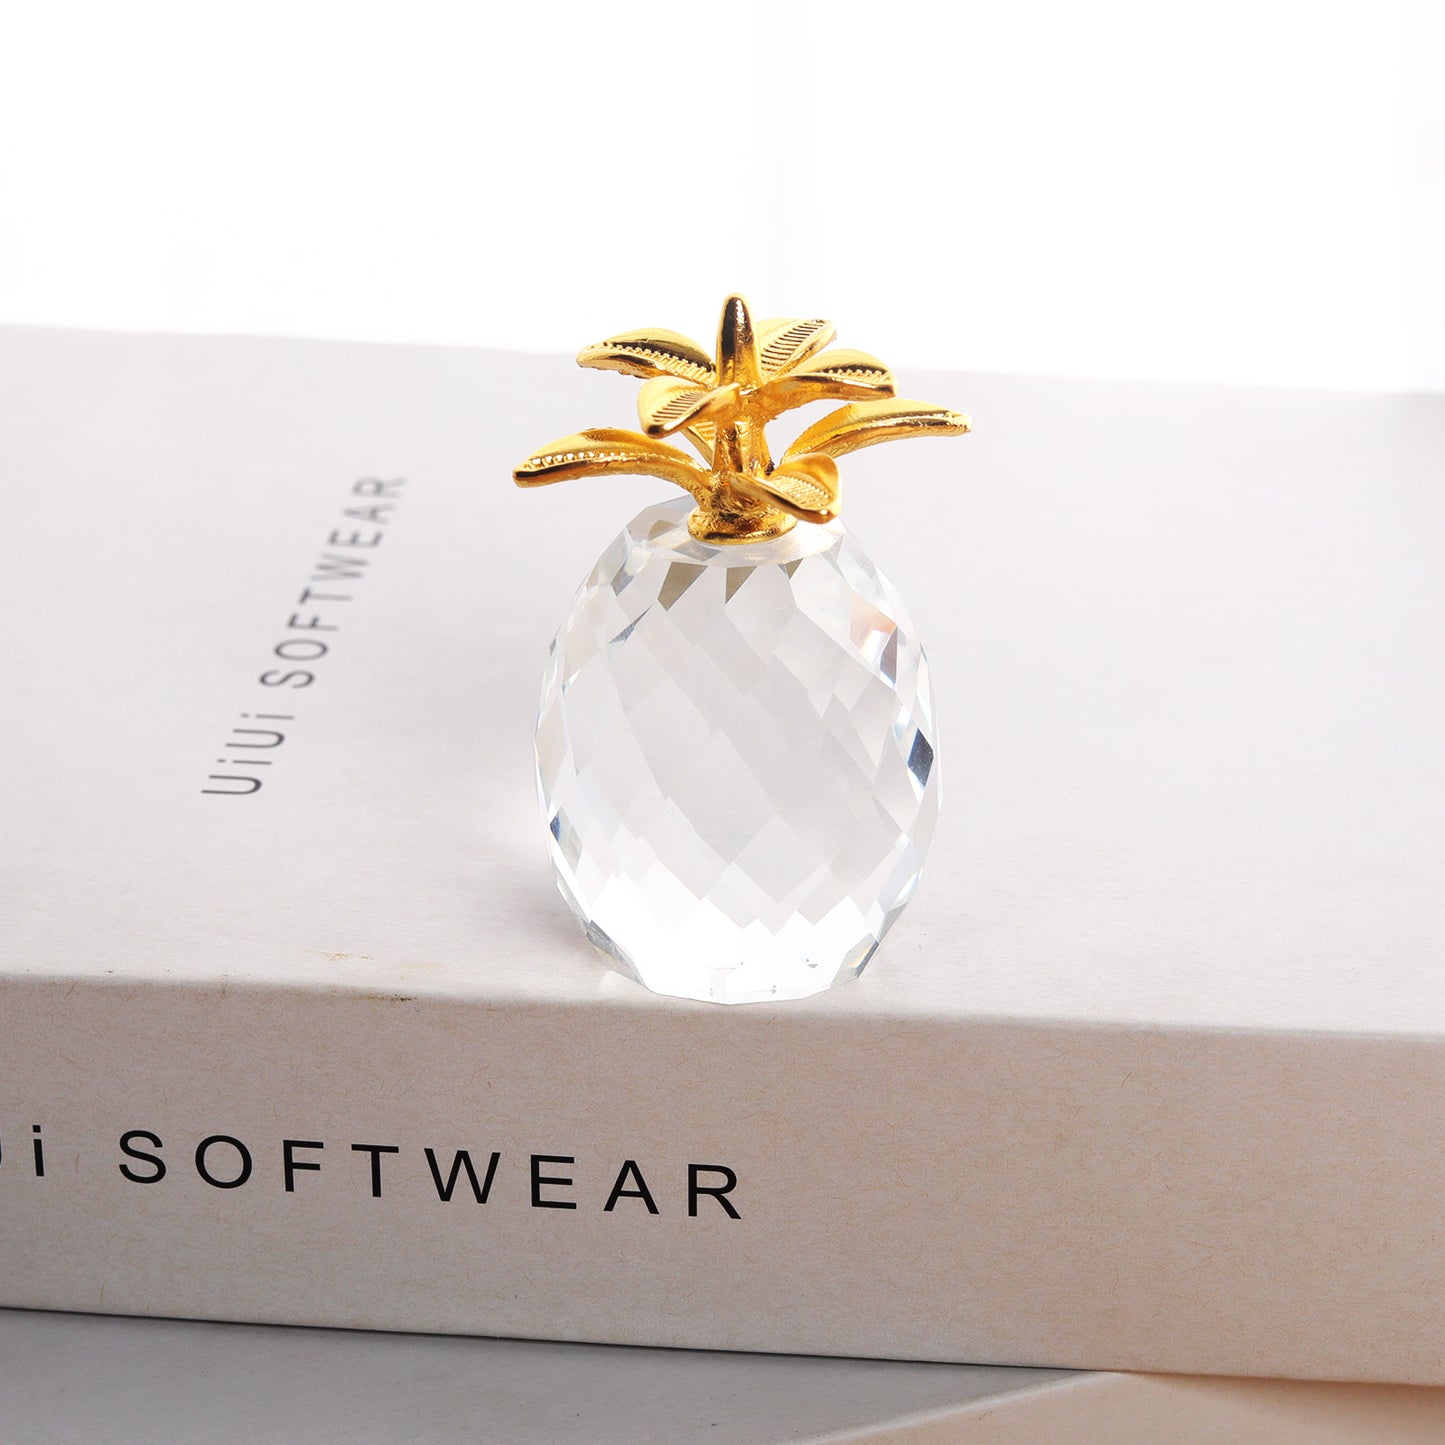 Crystal Pineapple Figurine with Golden Leaves